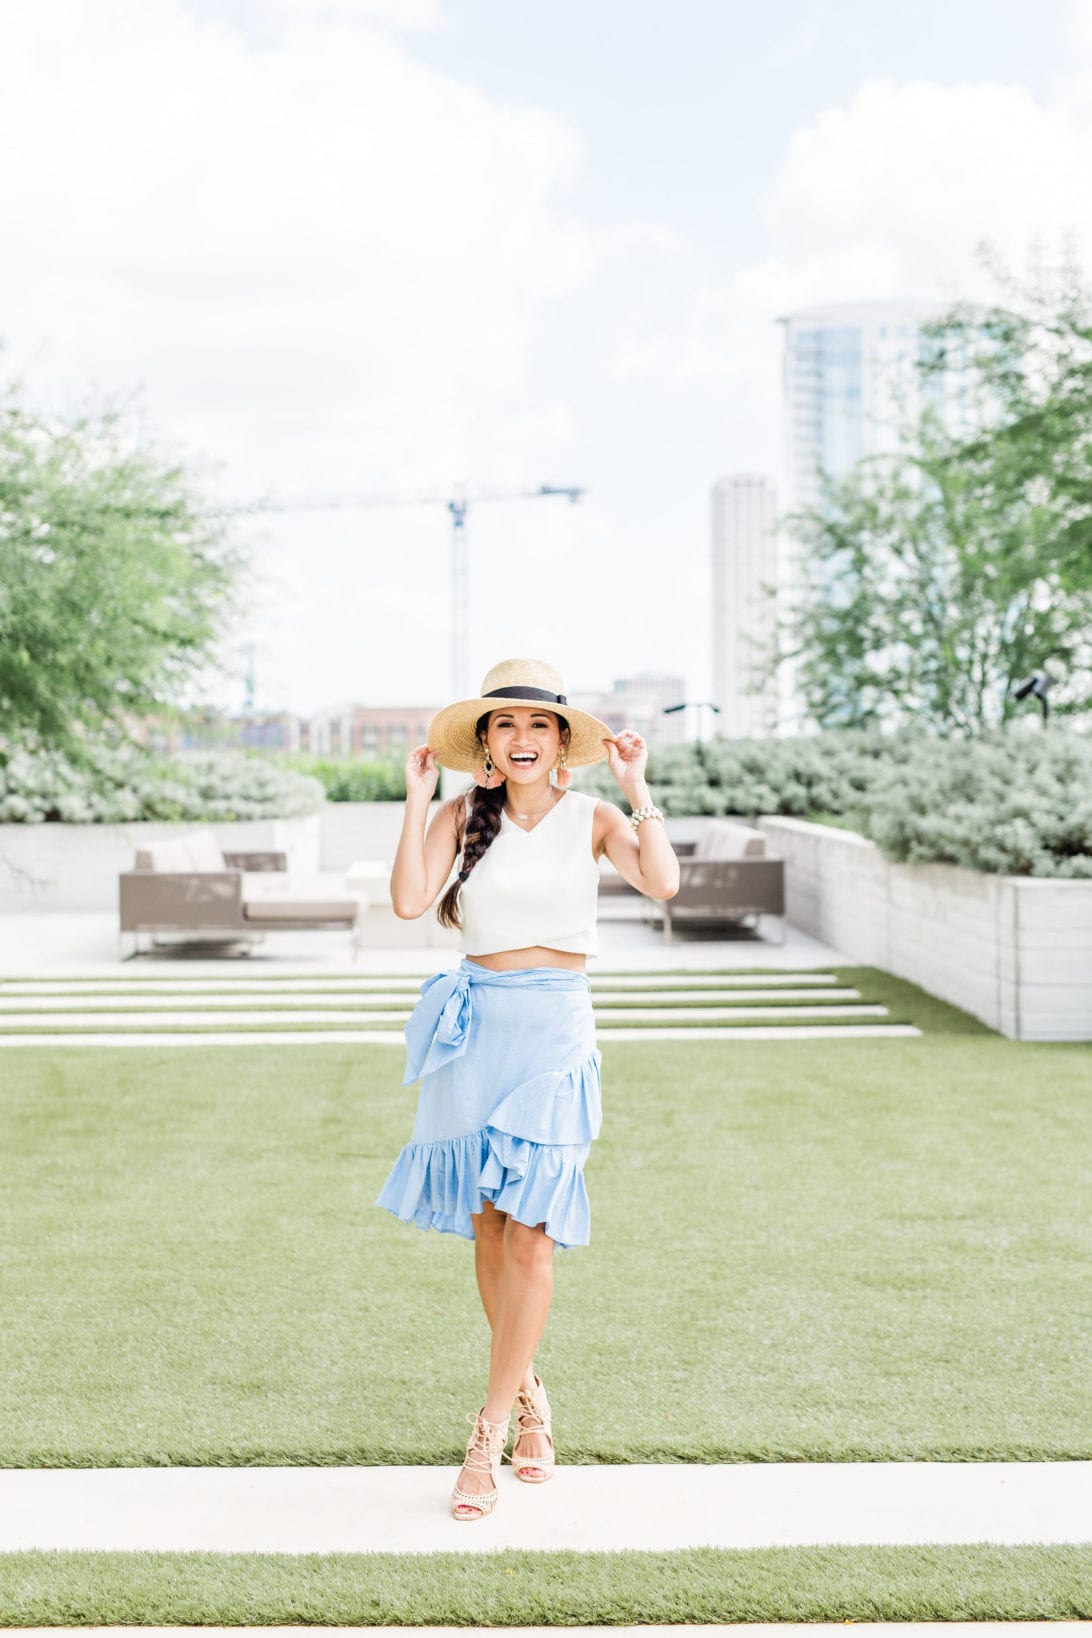 blue ruffle skirt, chic wish, straw hat, Jeffrey Campbell wedges, #dawnpdarnell, #summerstyle #houstonblogger, summer entertaining, summer party, soiree, how to throw a summer soiree, tips to throwing a summer soiree, outdoor entertaining, home and gardens, garden party, summer tablescape 